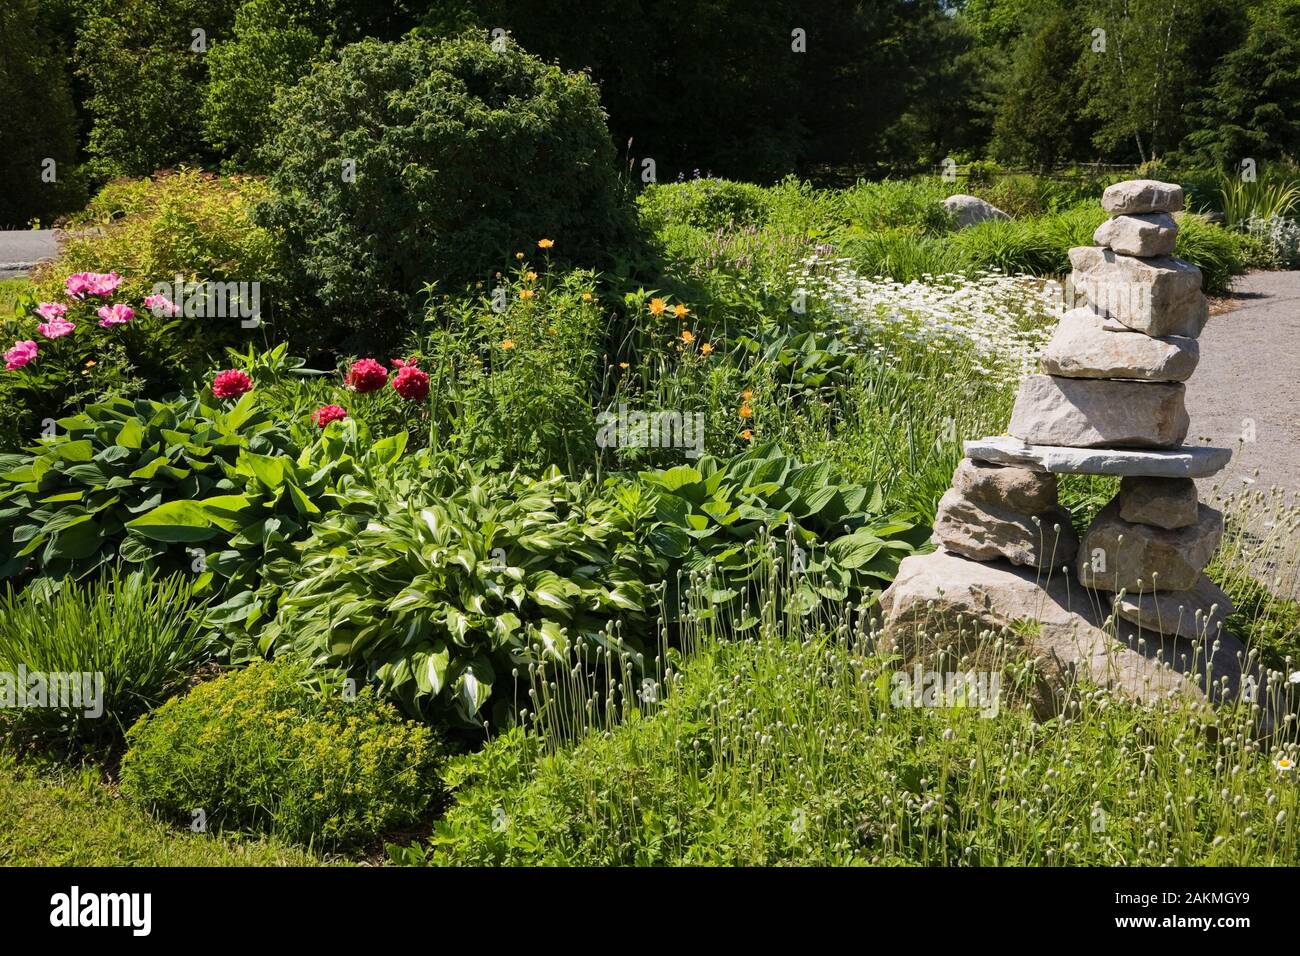 Stacked rock sculpture in border planted with Hosta plants, red and pink  Paeonia - Peony flowers in late spring in Greeting garden Stock Photo -  Alamy